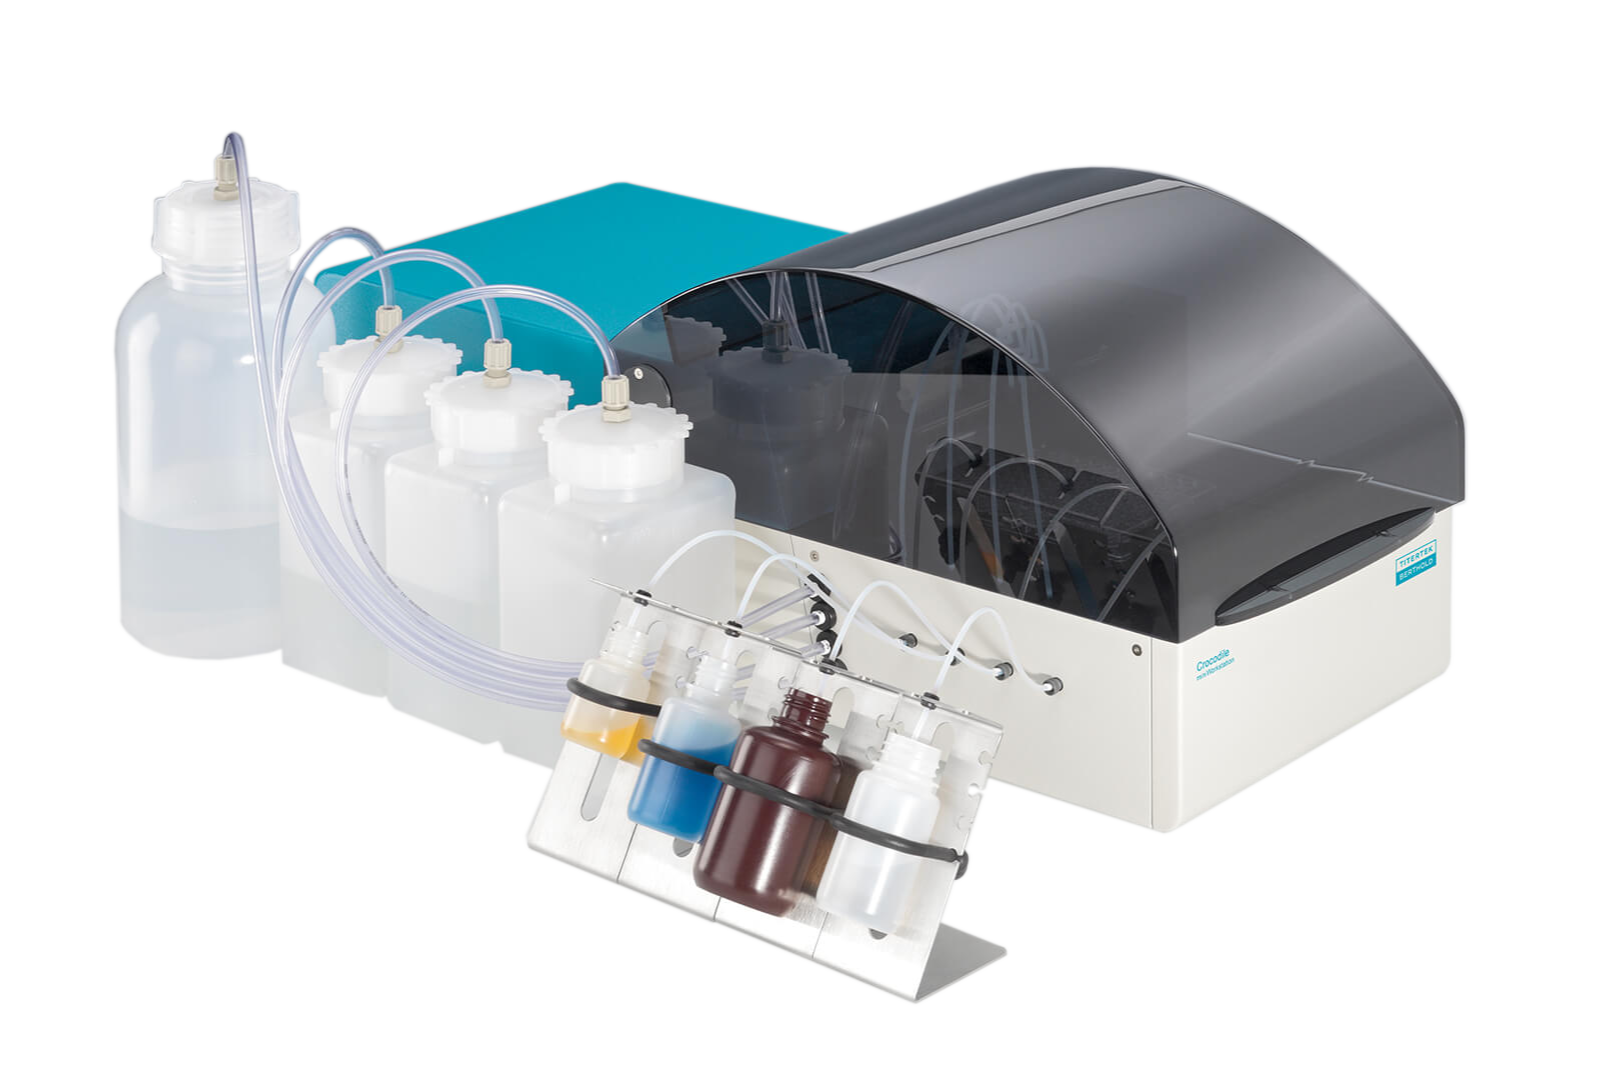 Personal workstation instrument to automate microplate assays to dispense, wash, shake and incubate.